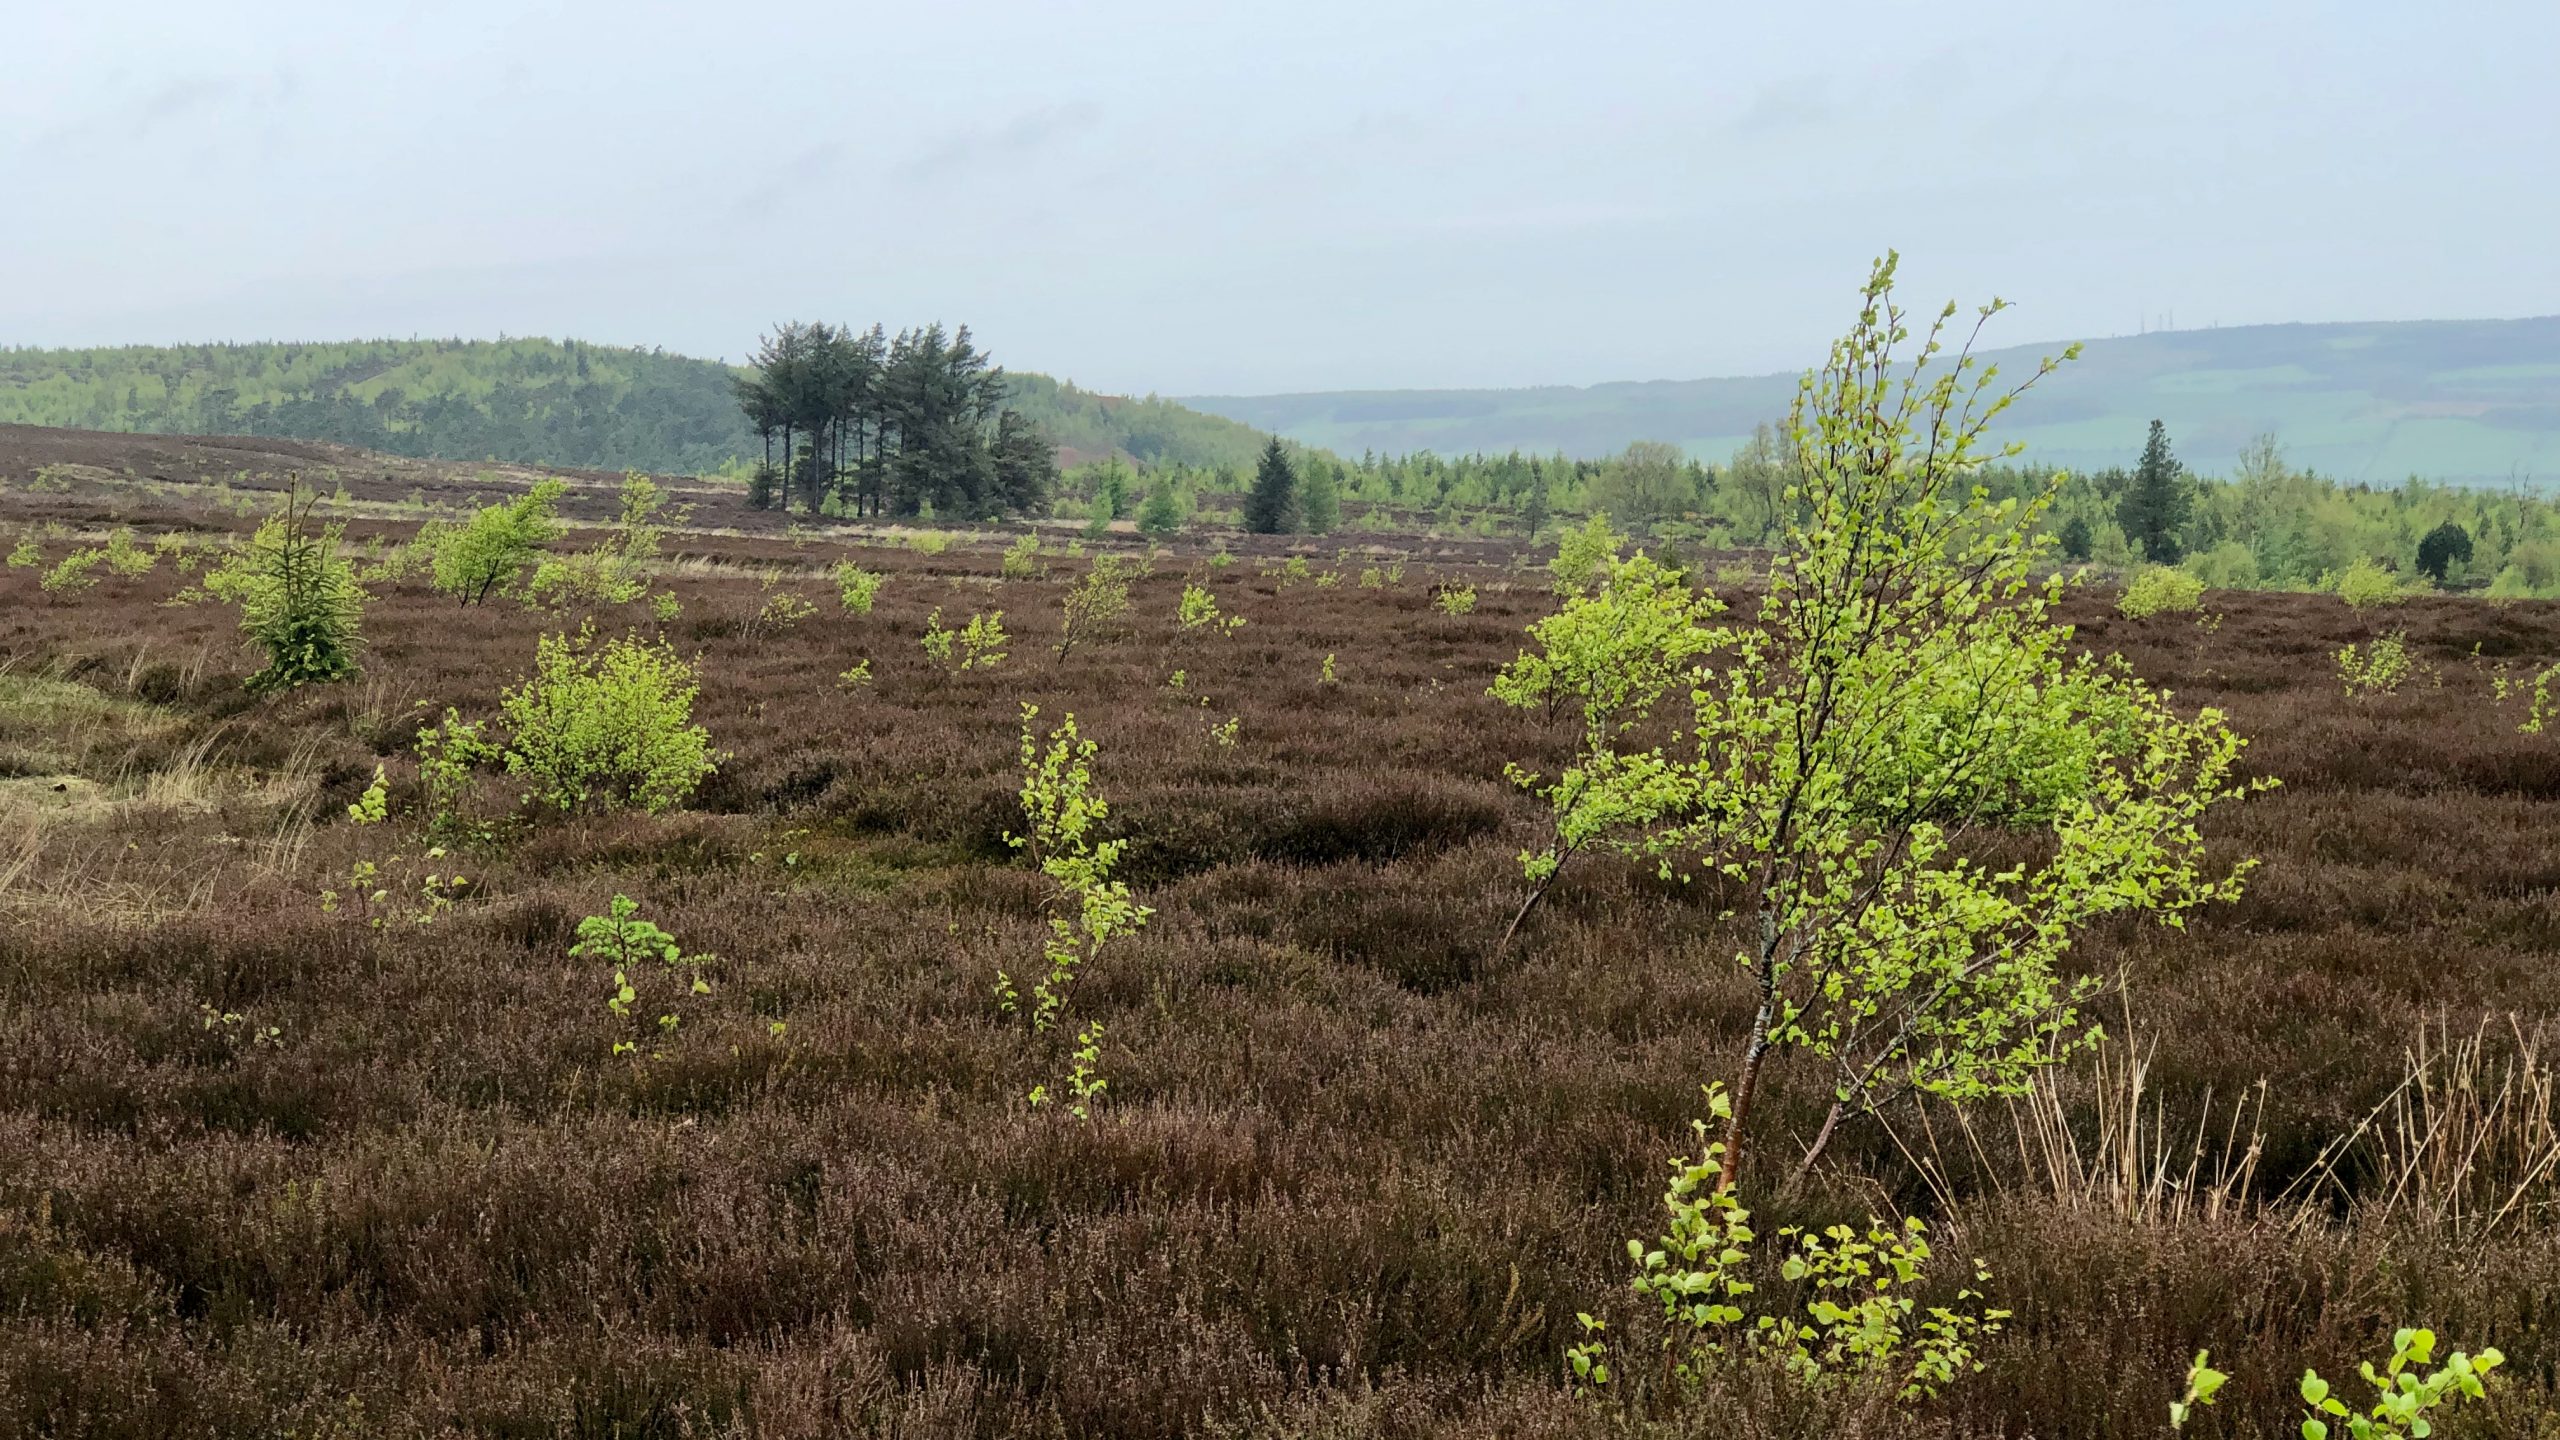 Birch — a pioneer species in the succession of moorland into woodland